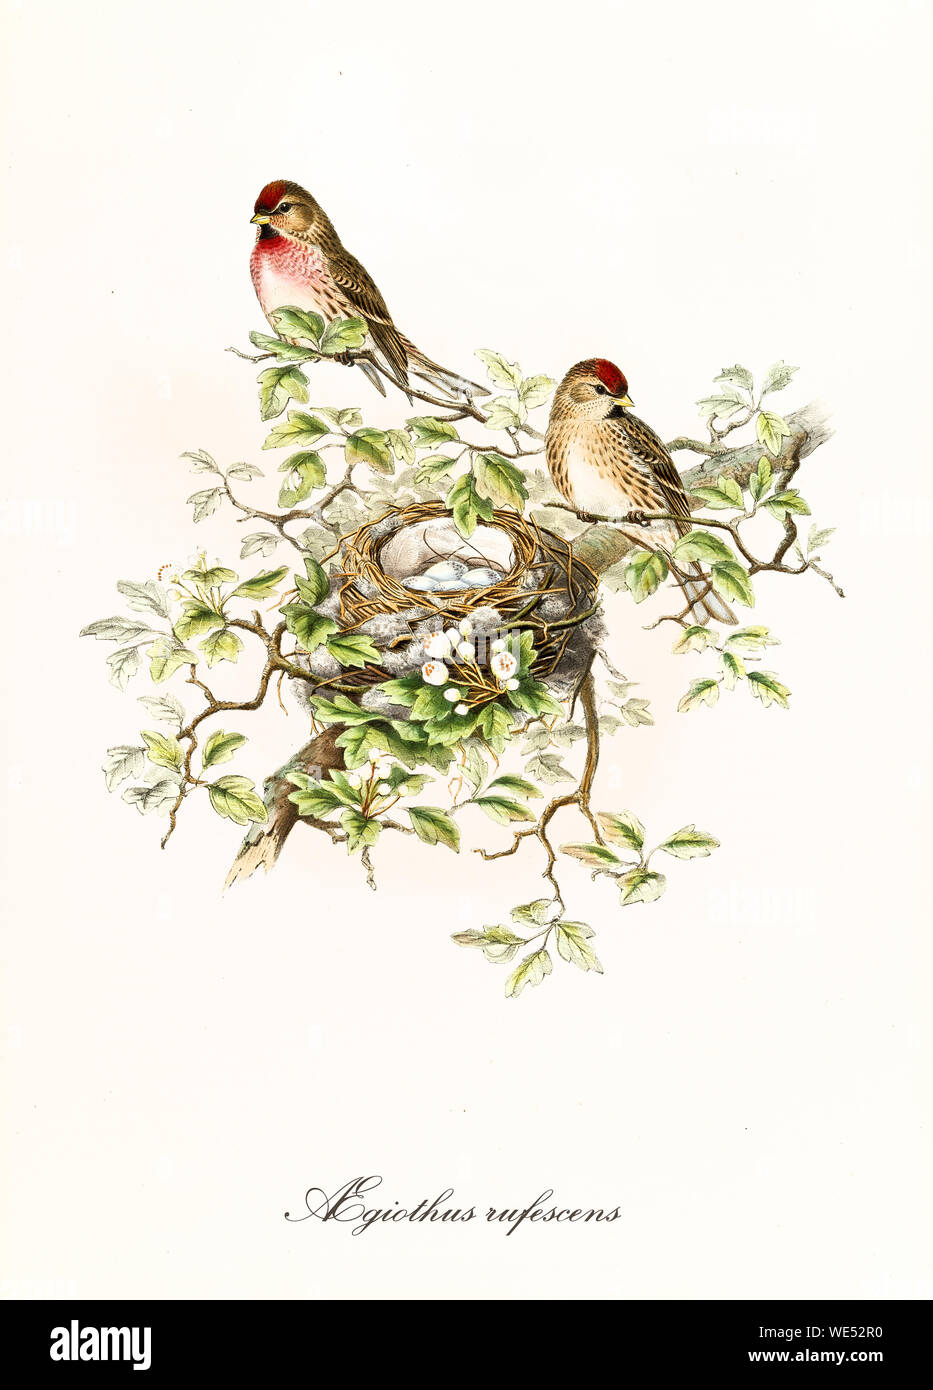 REDPOLL PRINT vintage lithograph from 1958